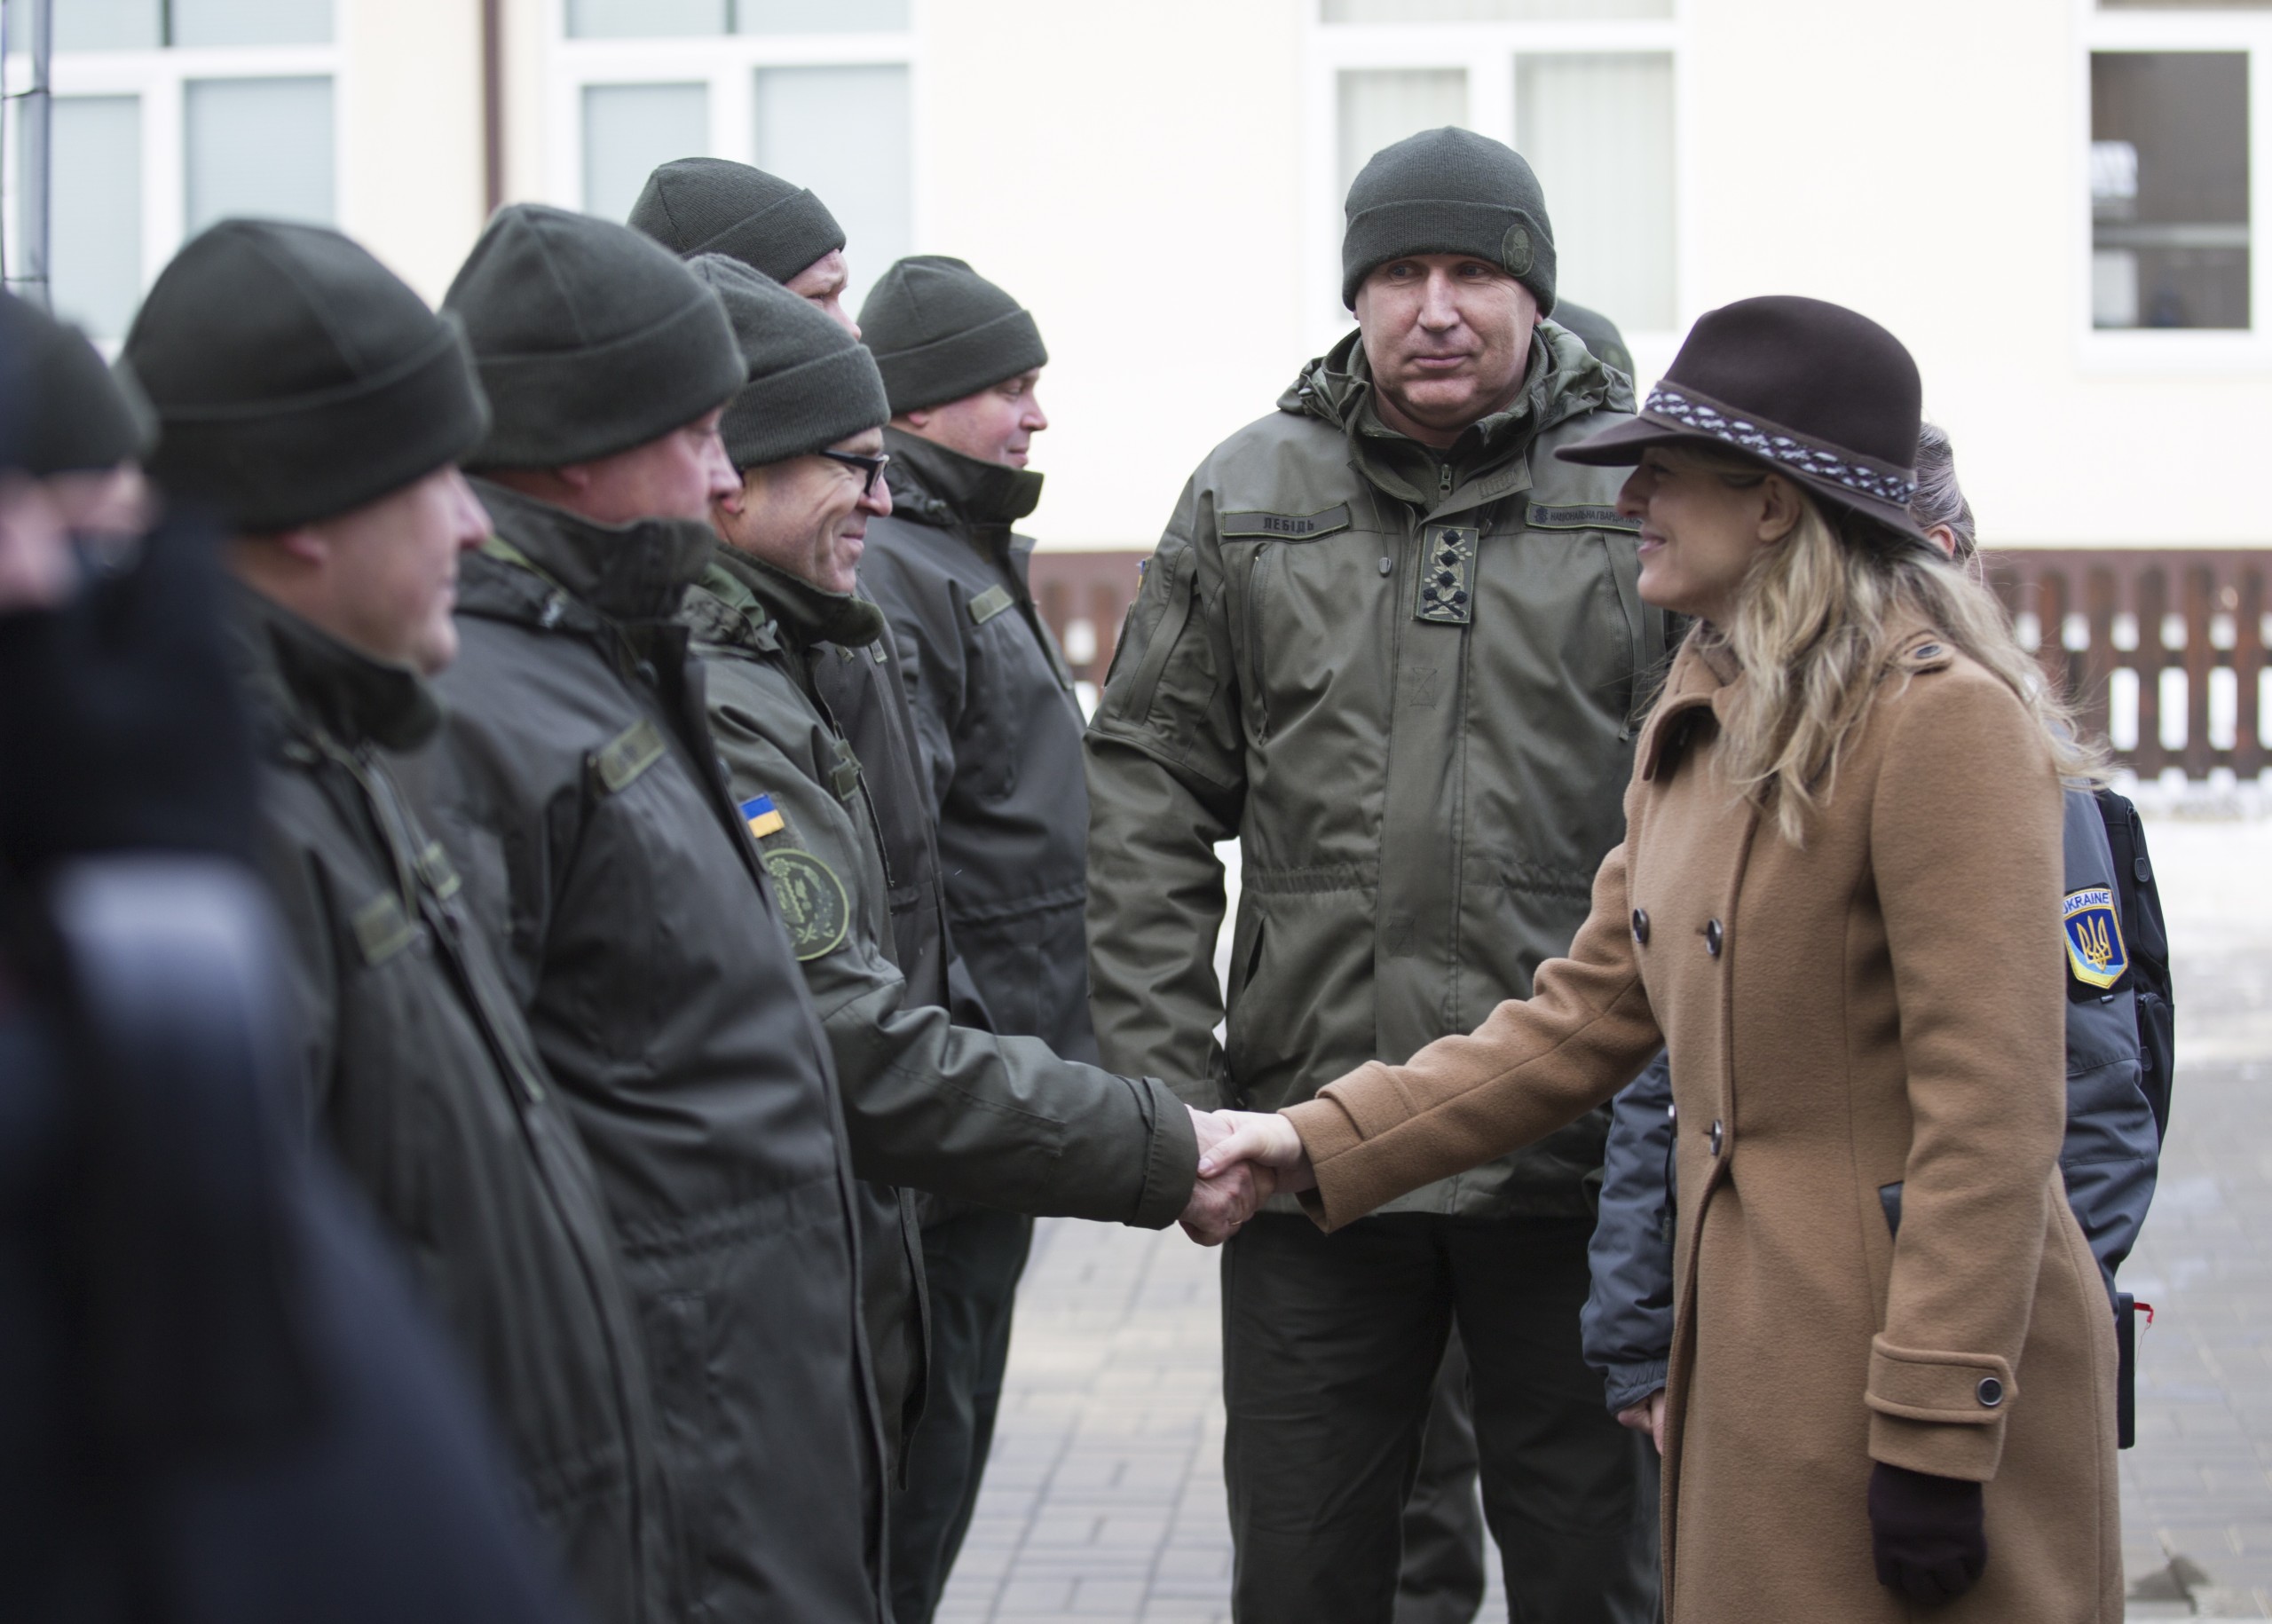 epa09693252 A handout photo made available by the Ukrainian National Guard press service shows Melanie Joly (R), Canadian Foreign Minister, visiting the International training center of Ukrainian National Guard in the village of Stare of Kyiv Region, Ukraine, 18 January 2022. Melanie Joly arrived in Ukraine to reaffirm the unity of NATO members in support of Ukraine and the continuation of fruitful cooperation between Canada and Ukraine.  EPA/UKRAINIAN NATIONAL GUARD PRESS SERVICE HANDOUT HANDOUT HANDOUT EDITORIAL USE ONLY/NO SALES